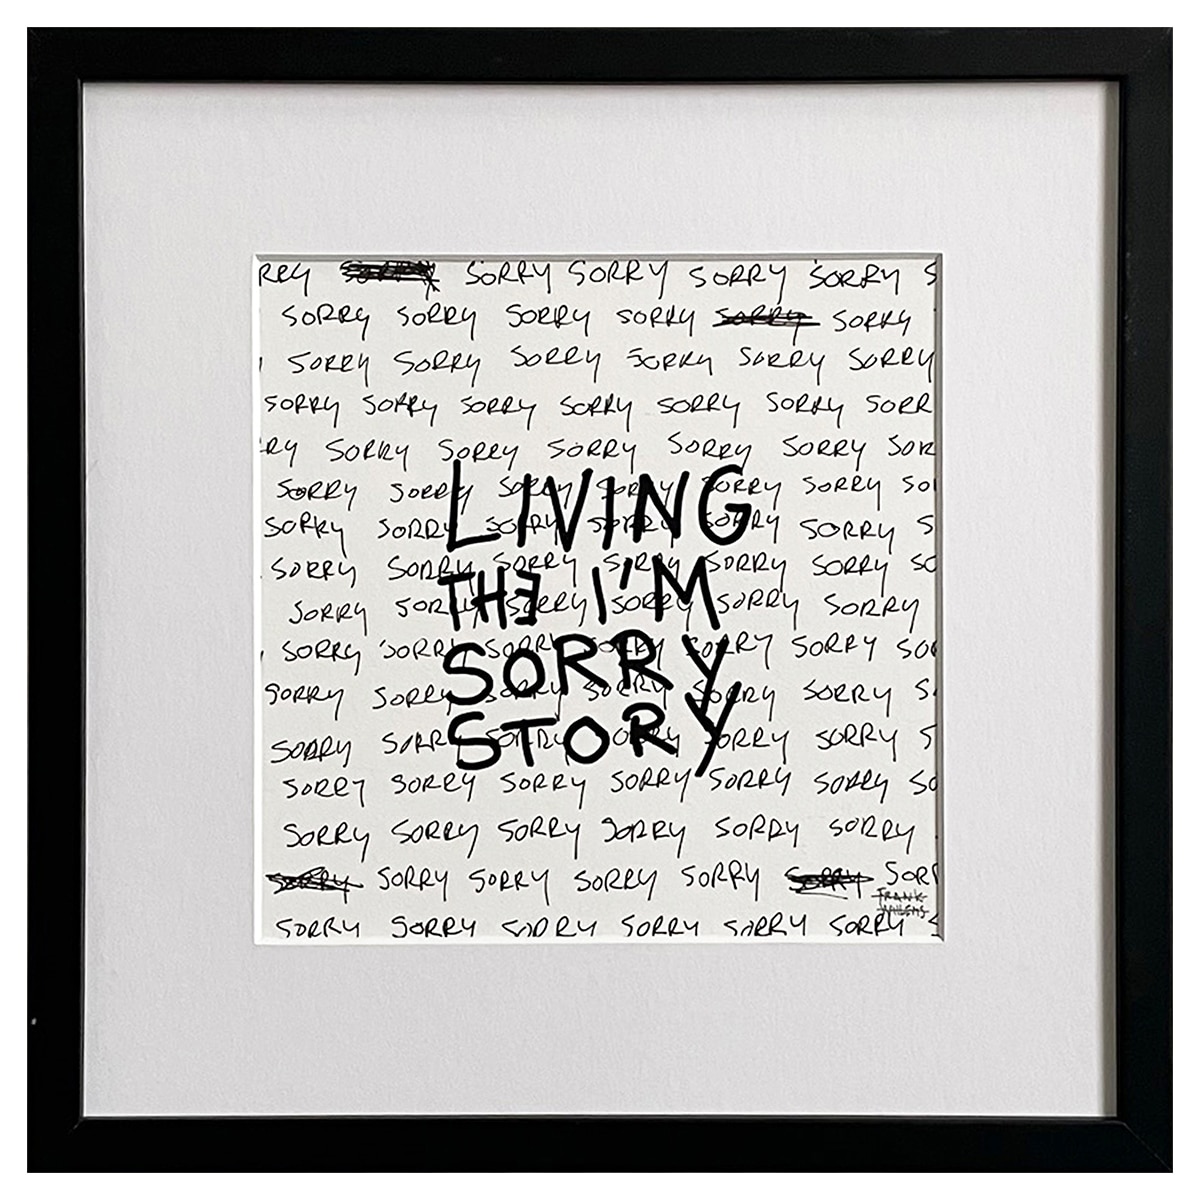 Limited Edt Text Prints - LIVING THE I'M SORRY STORY - Frank Willems